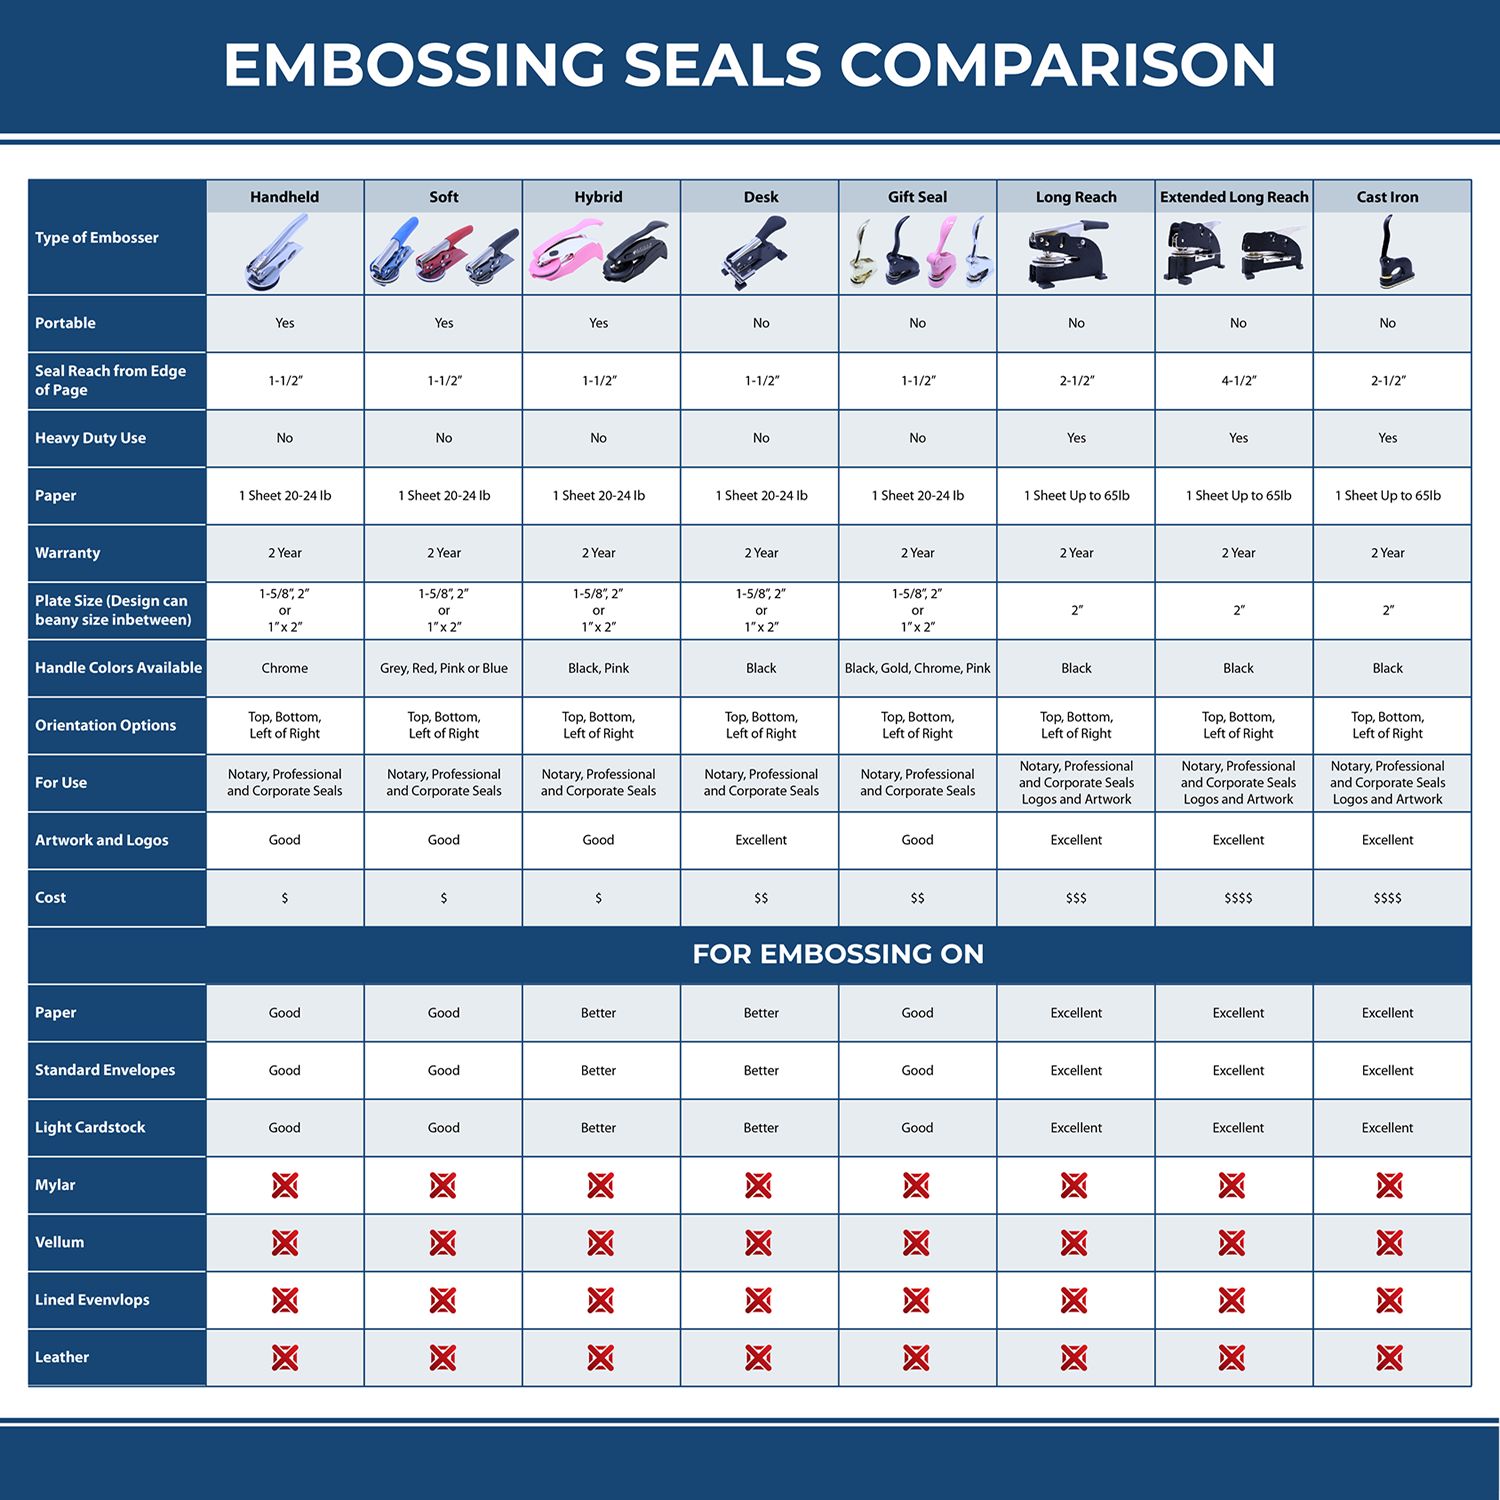 A comparison chart for the different types of mount models available for the Tennessee Desk Surveyor Seal Embosser.